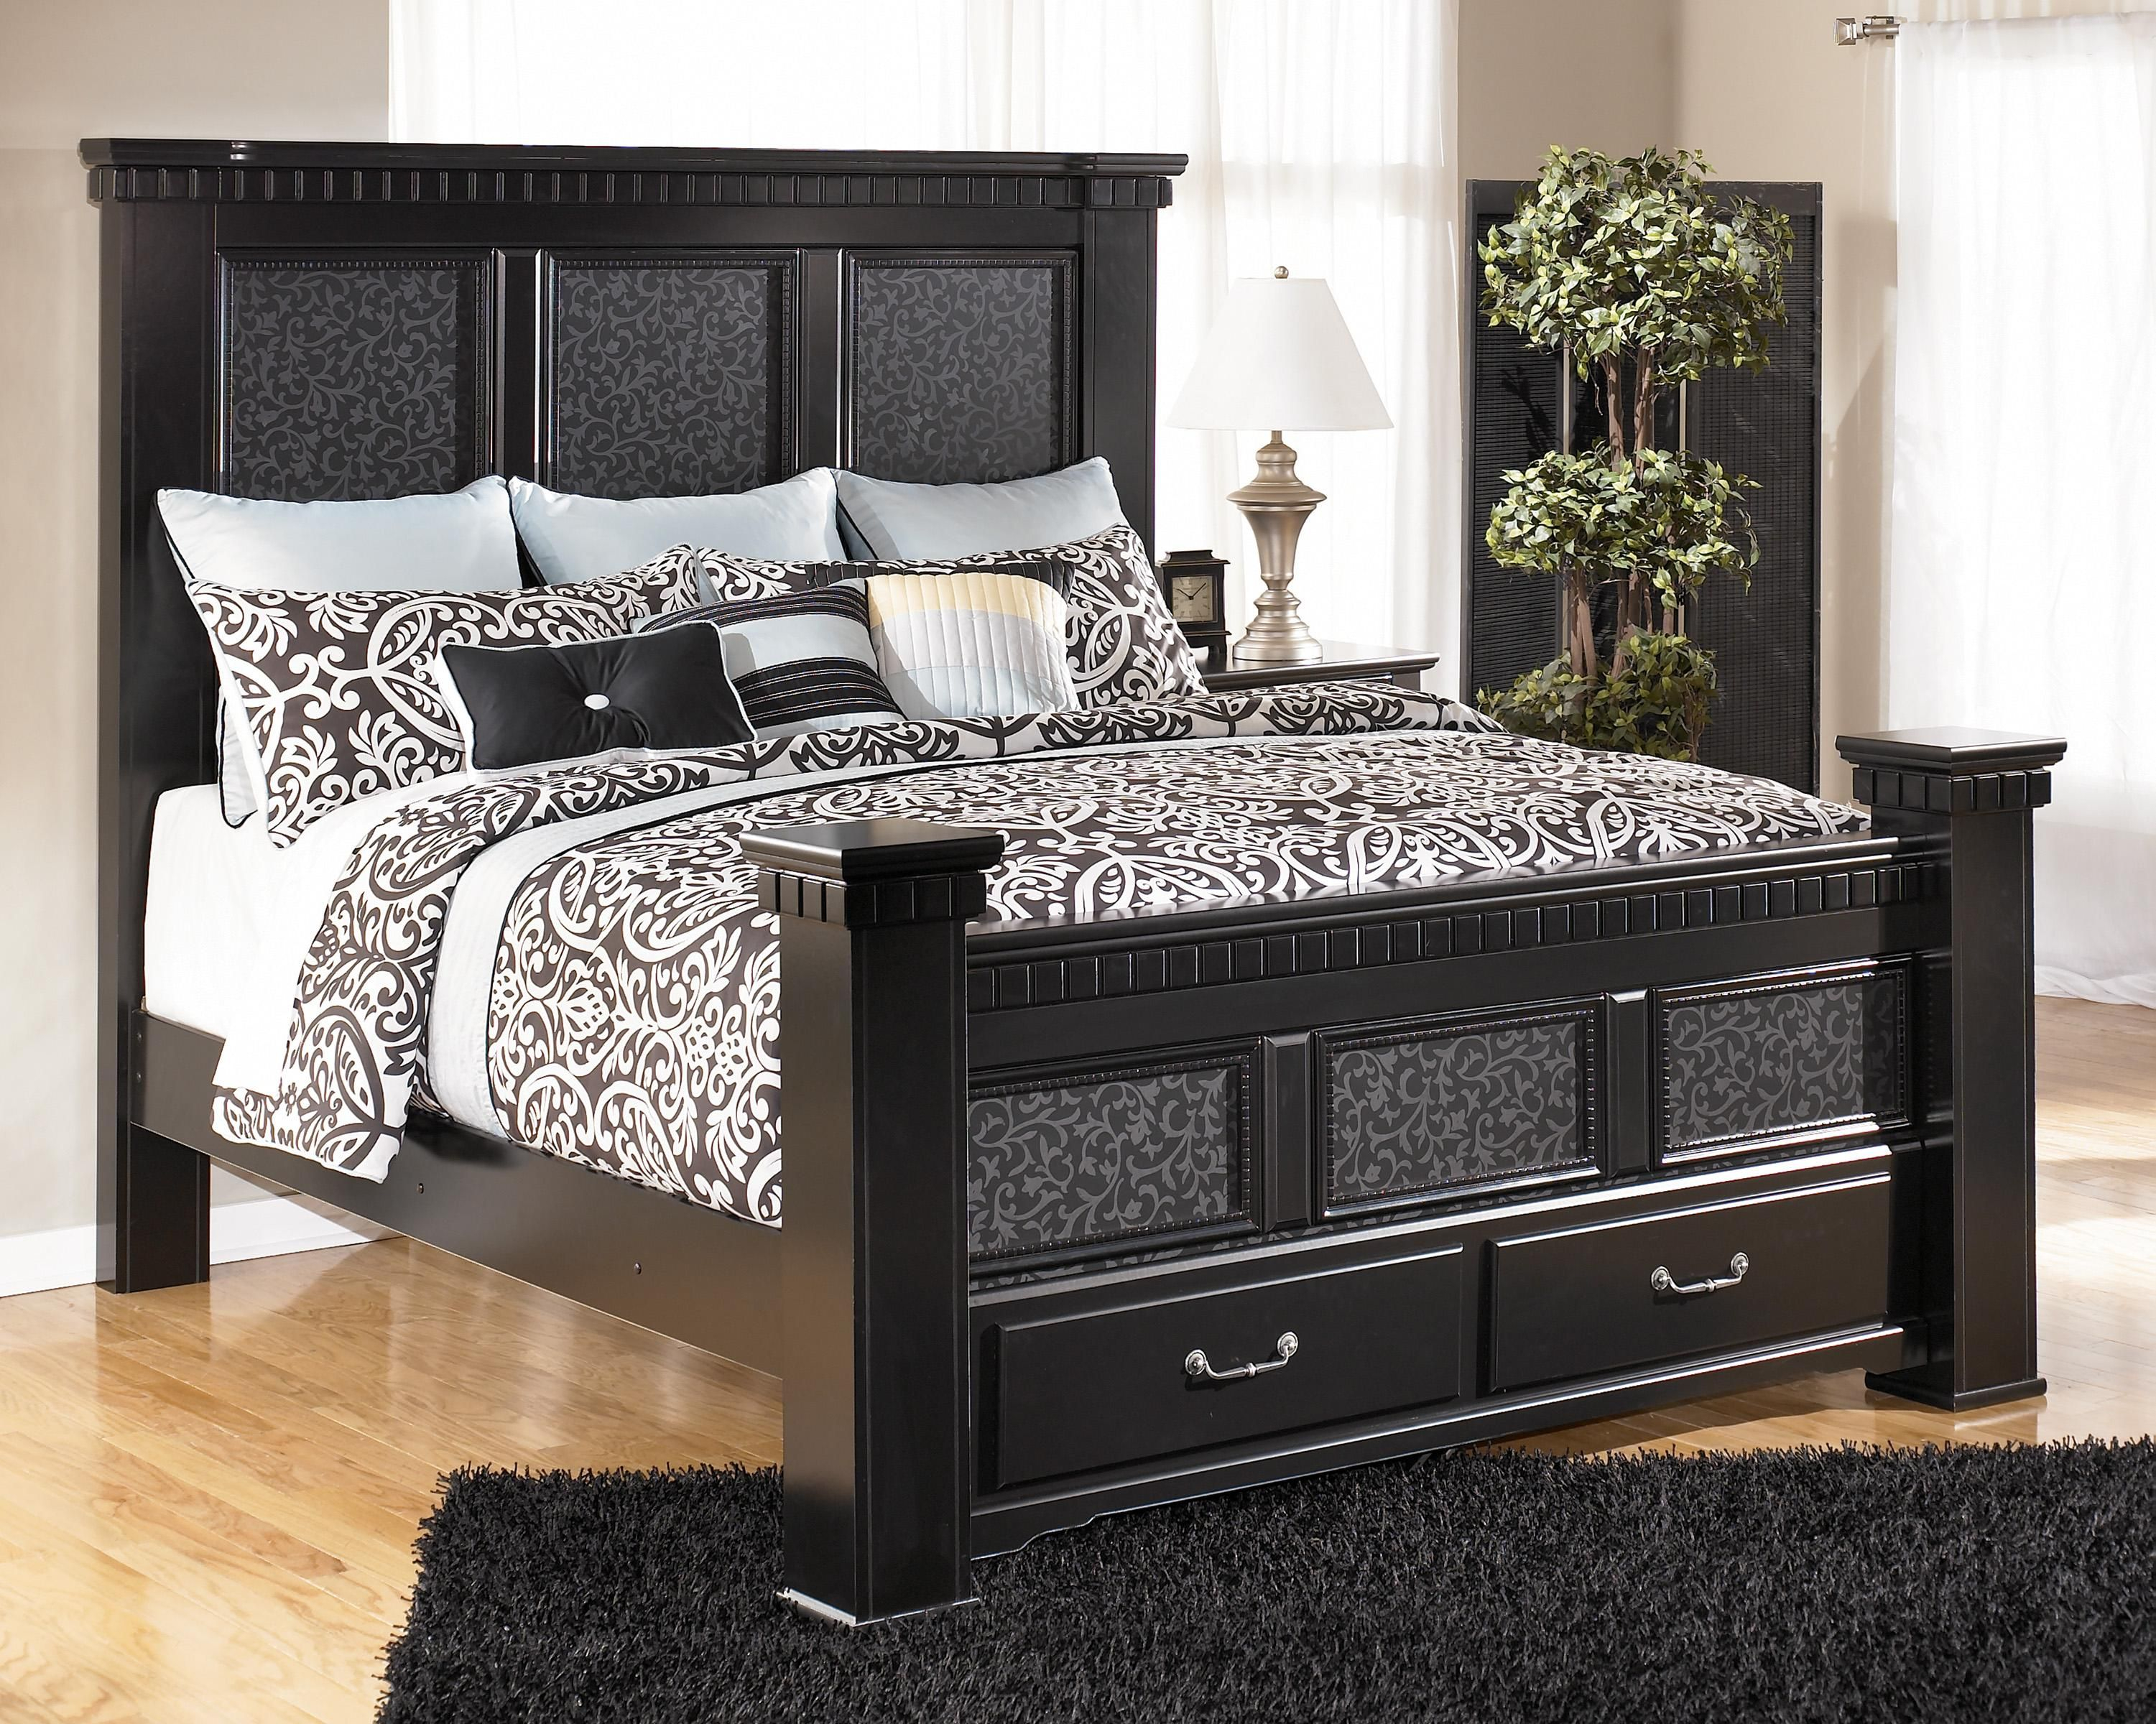 Cavallino King Mansion Bed With Storage Footboard Signature within proportions 3001 X 2400